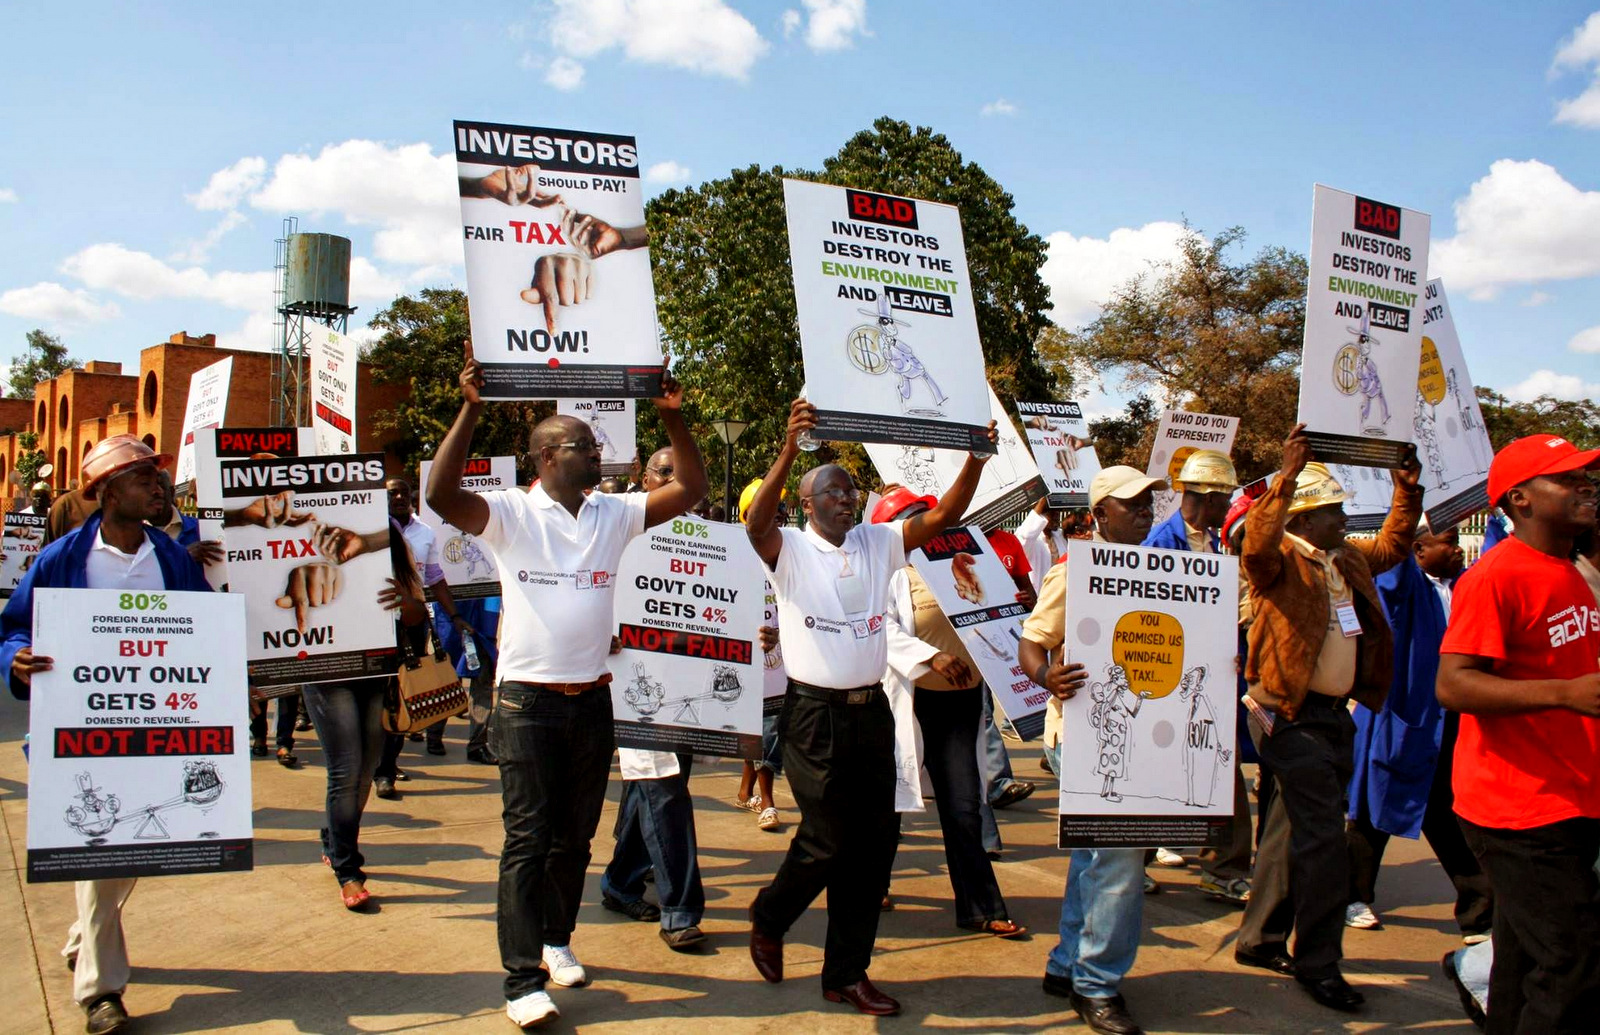 Zambians protest against the unfair tax system employed by multinational companies, such as Glencore, in place across Africa. (Photo: Demotix)